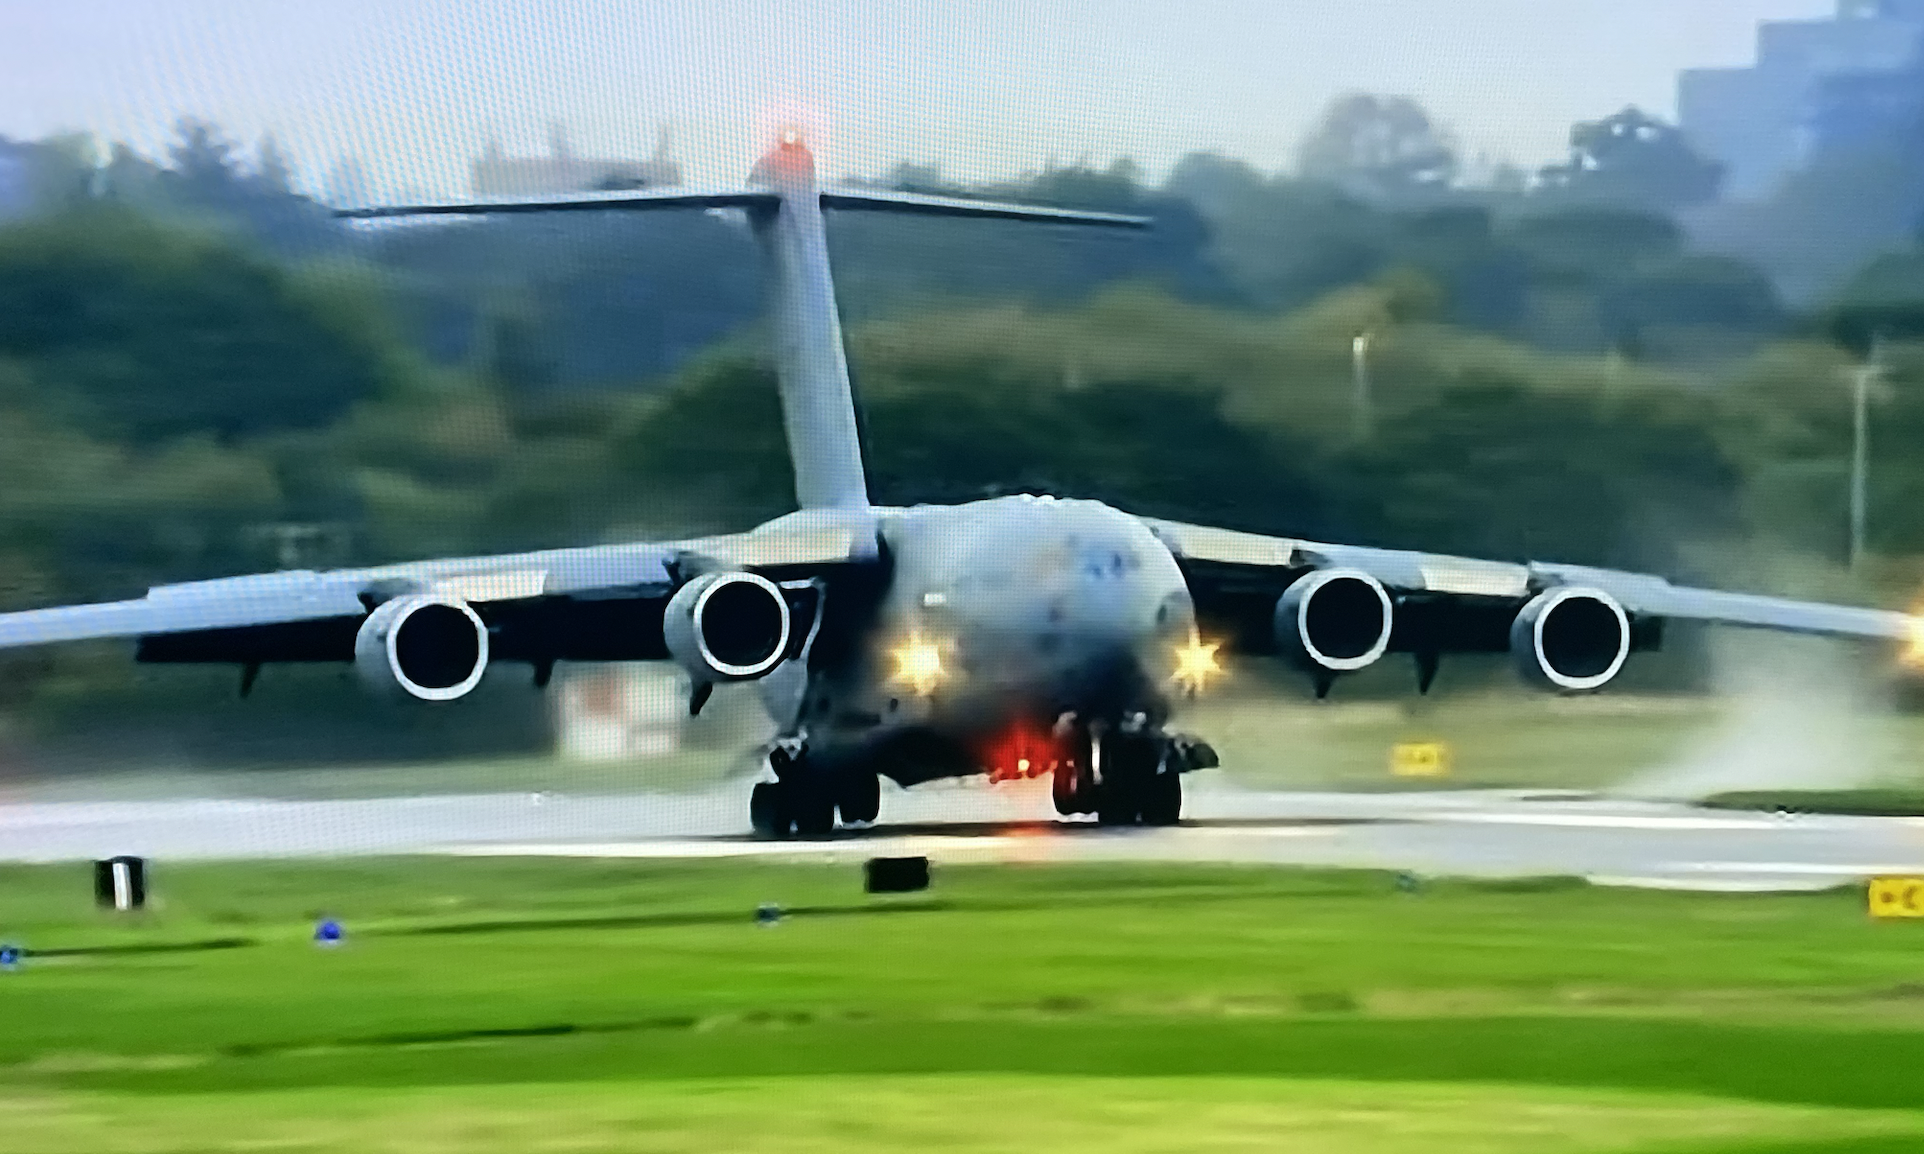 RAF C-17 was used to transport the Queen's coffin to London, using the call sign 'Kittyhawk' for the final time.